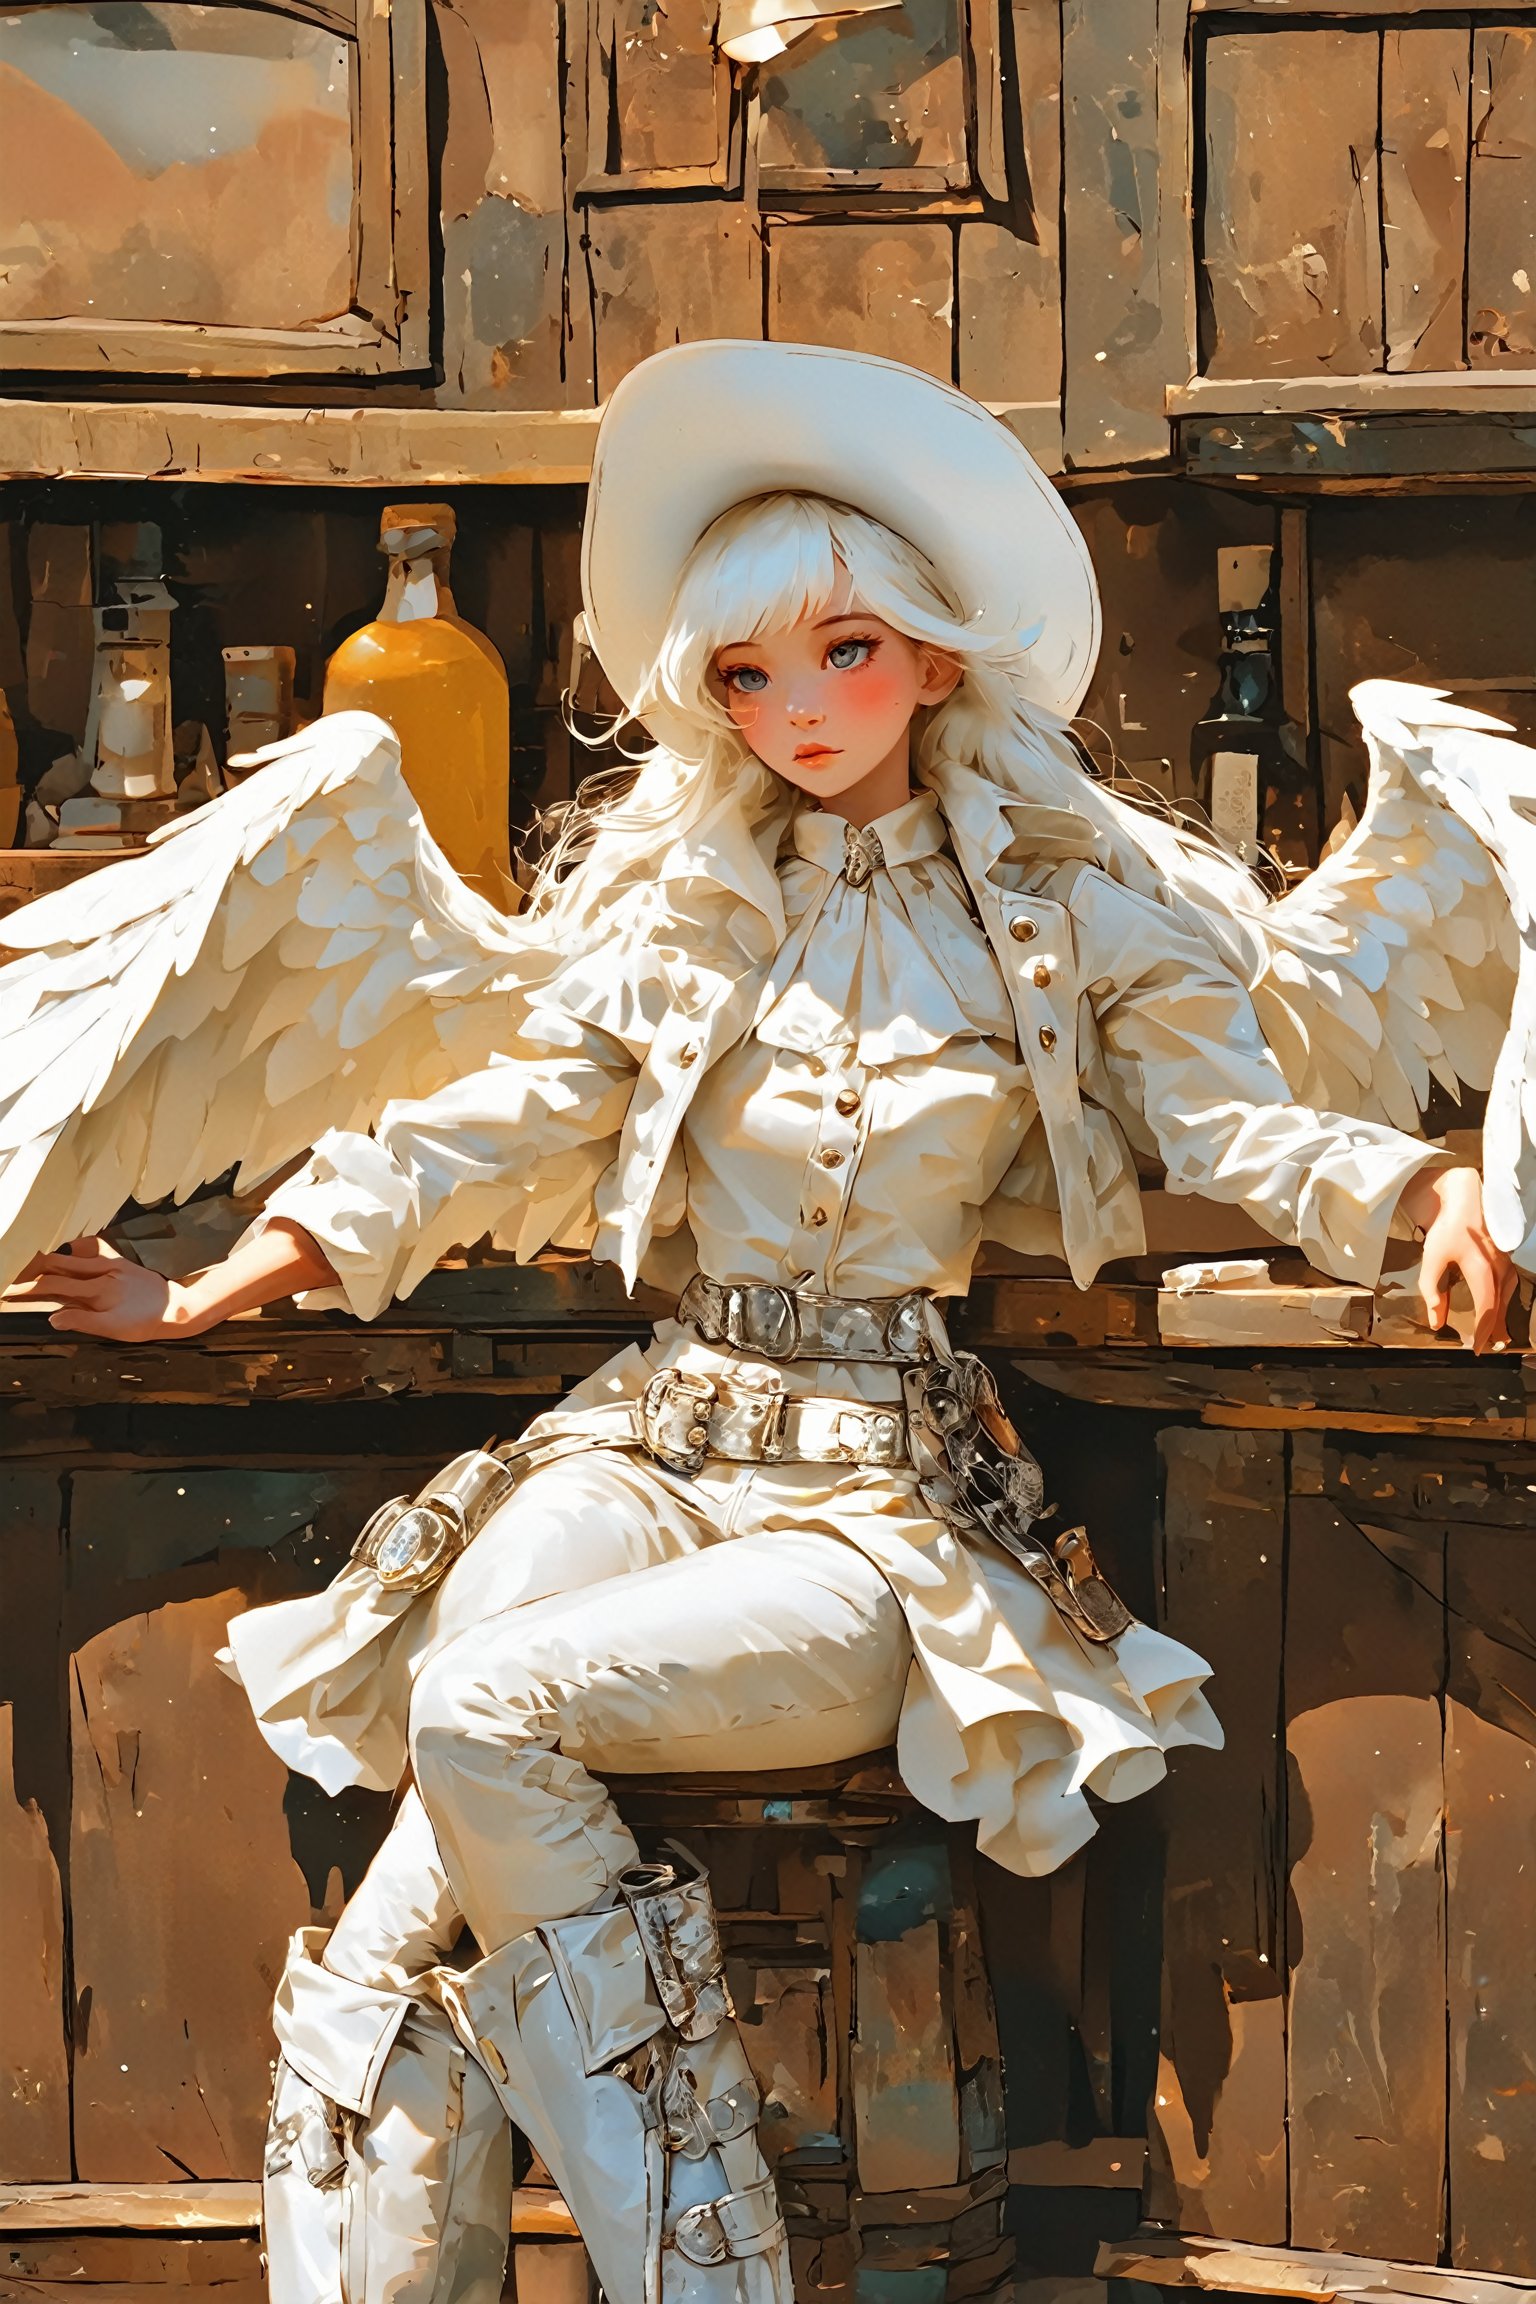  Western saloon,1 Girl,where a little girl dressed in a pure white cowboy costume sits on the counter. Her outfit includes a white cowboy hat, a tailored shirt, fringed jacket, and well-fitted trousers, all in pristine white. Polished boots and a classic belt with a silver buckle complete her look. Adding a touch of ethereal charm, she has pure white wings gracefully extending from her back,AngelStyle,wings,better photography,aesthetic portrait,dal-1